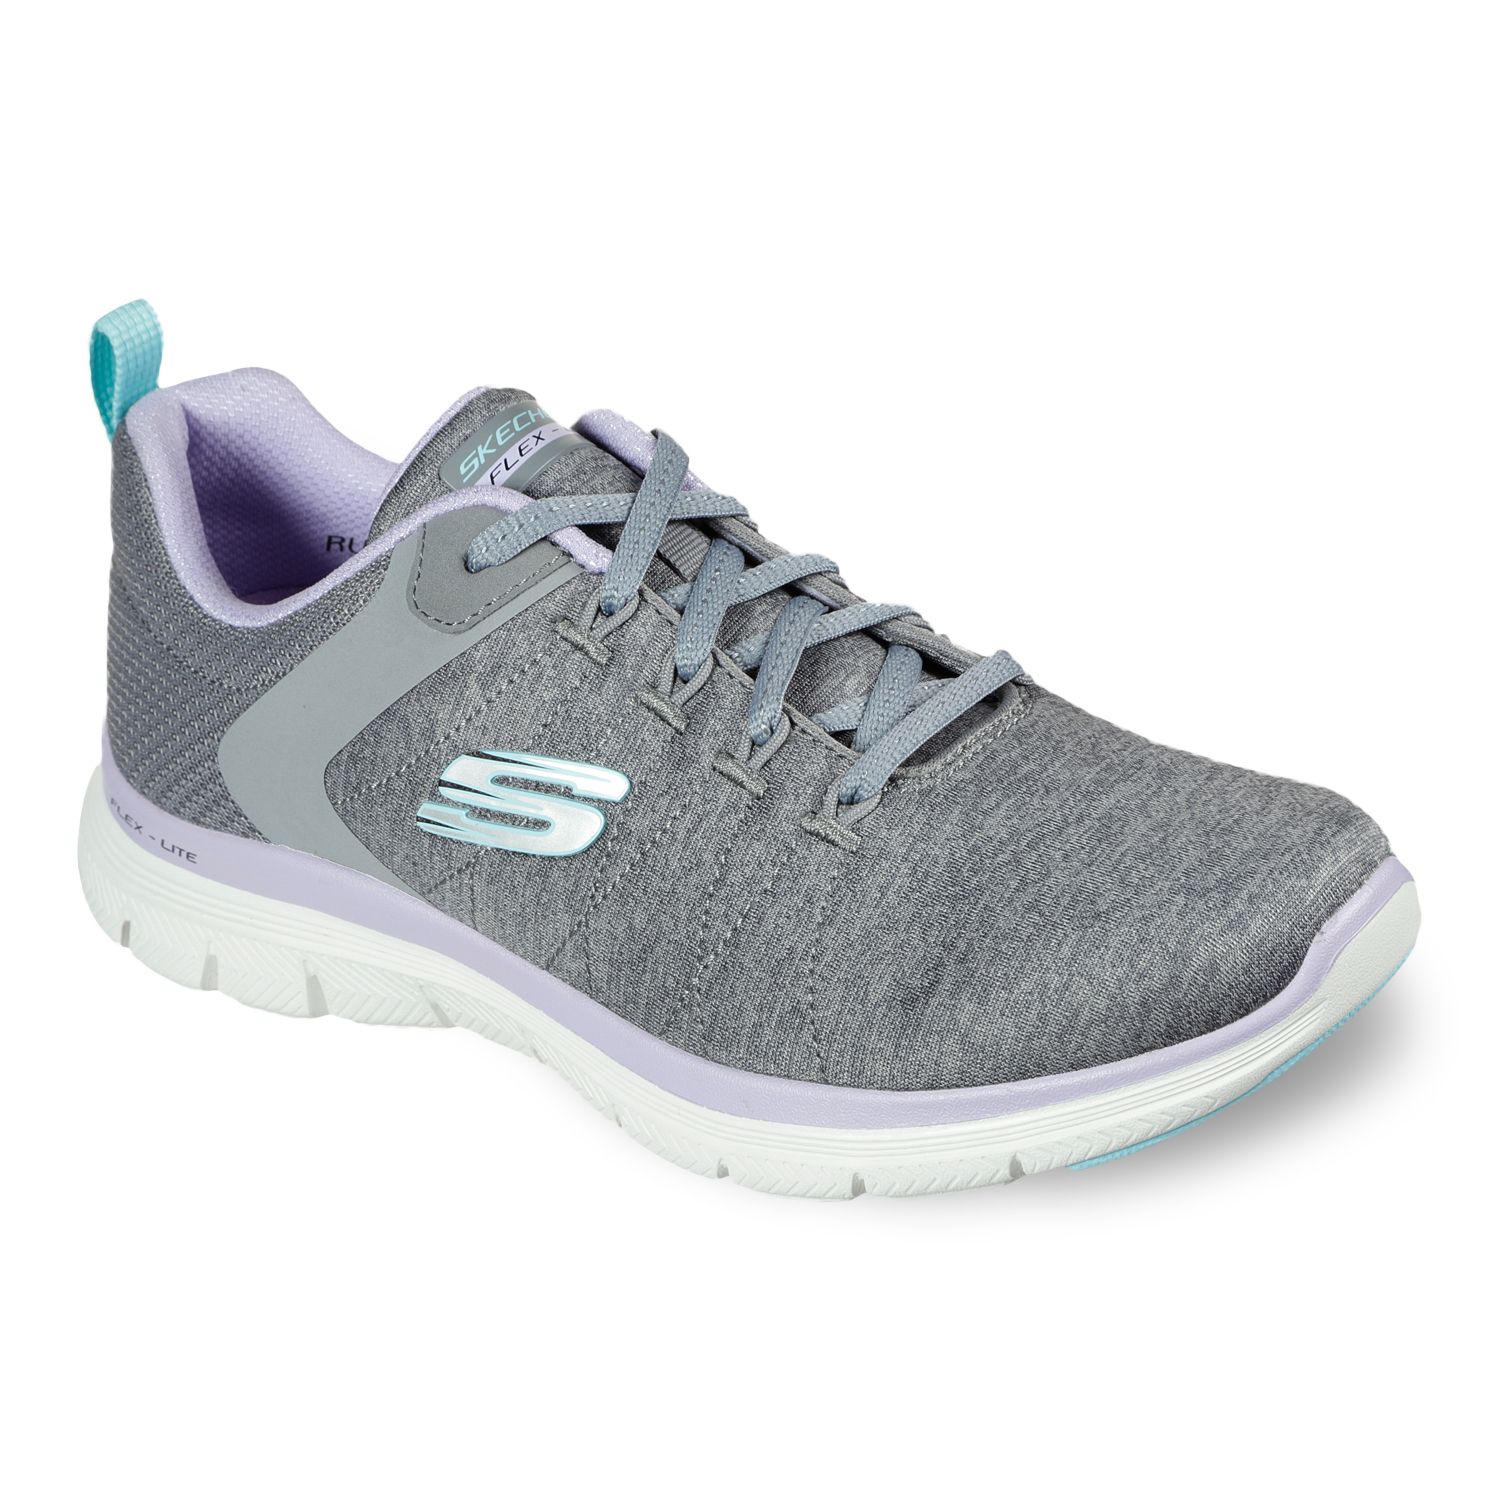 who sells skechers wide fit shoes